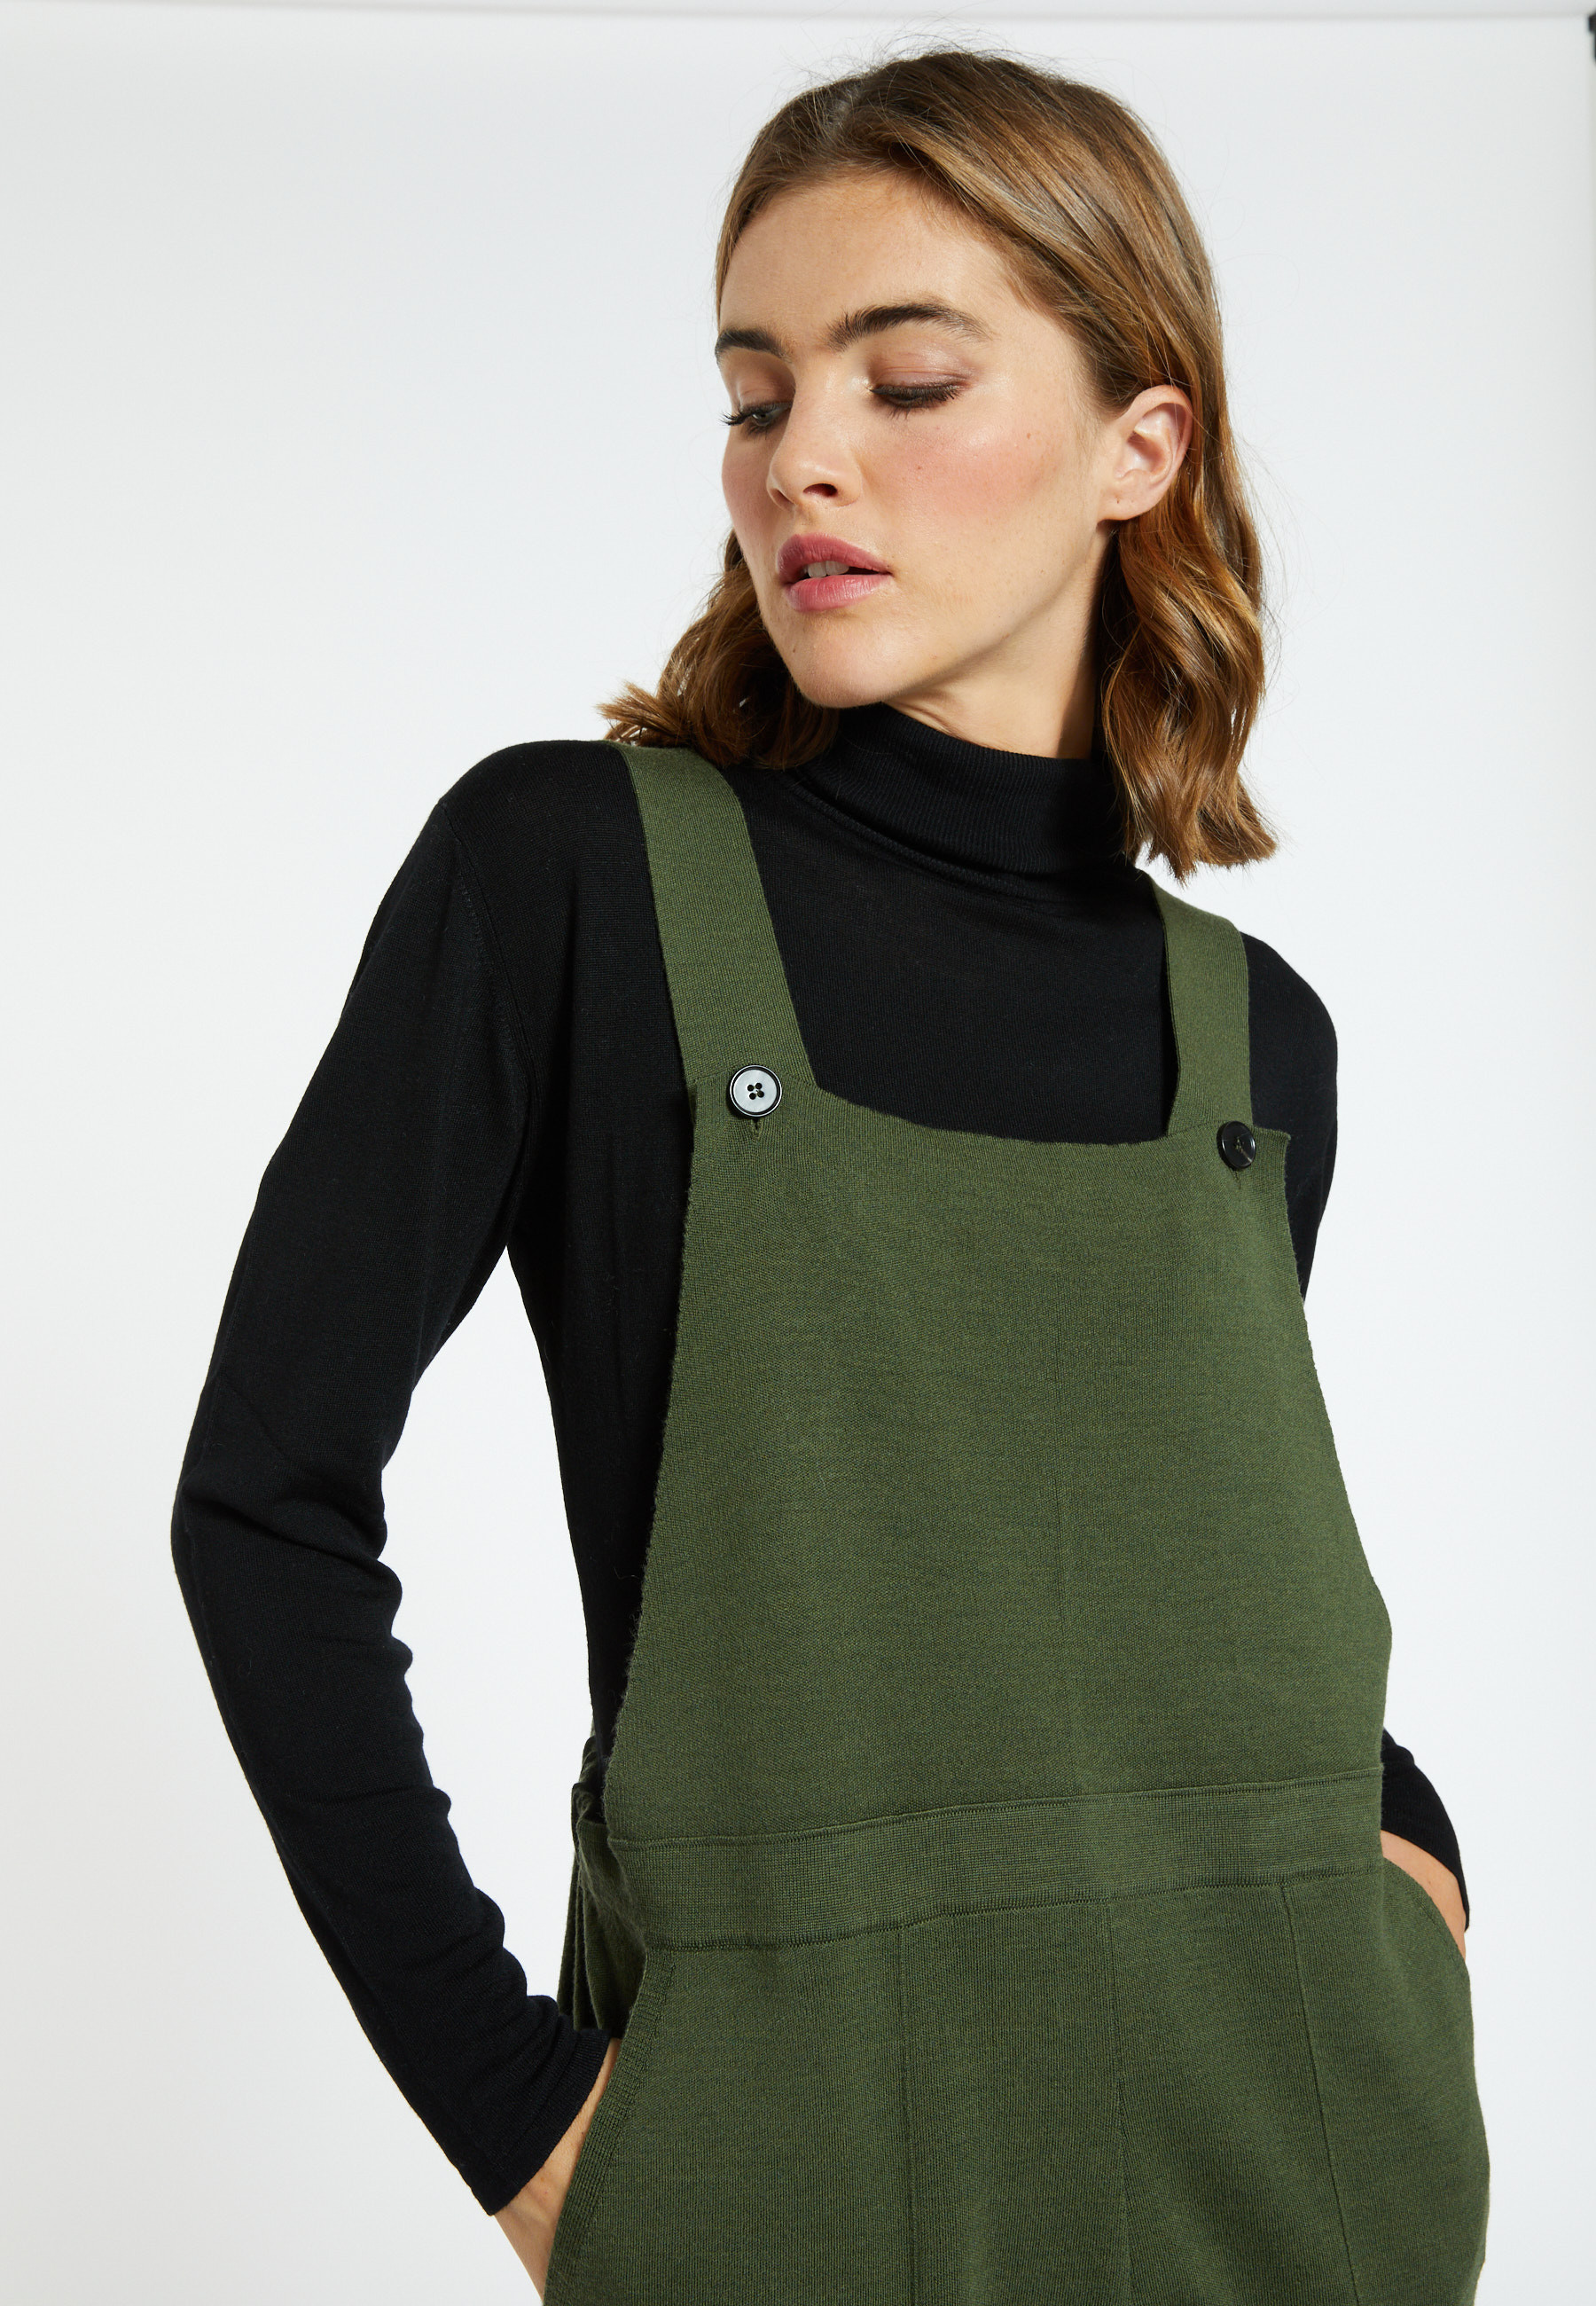 OLIVE GREEN DUNGAREE